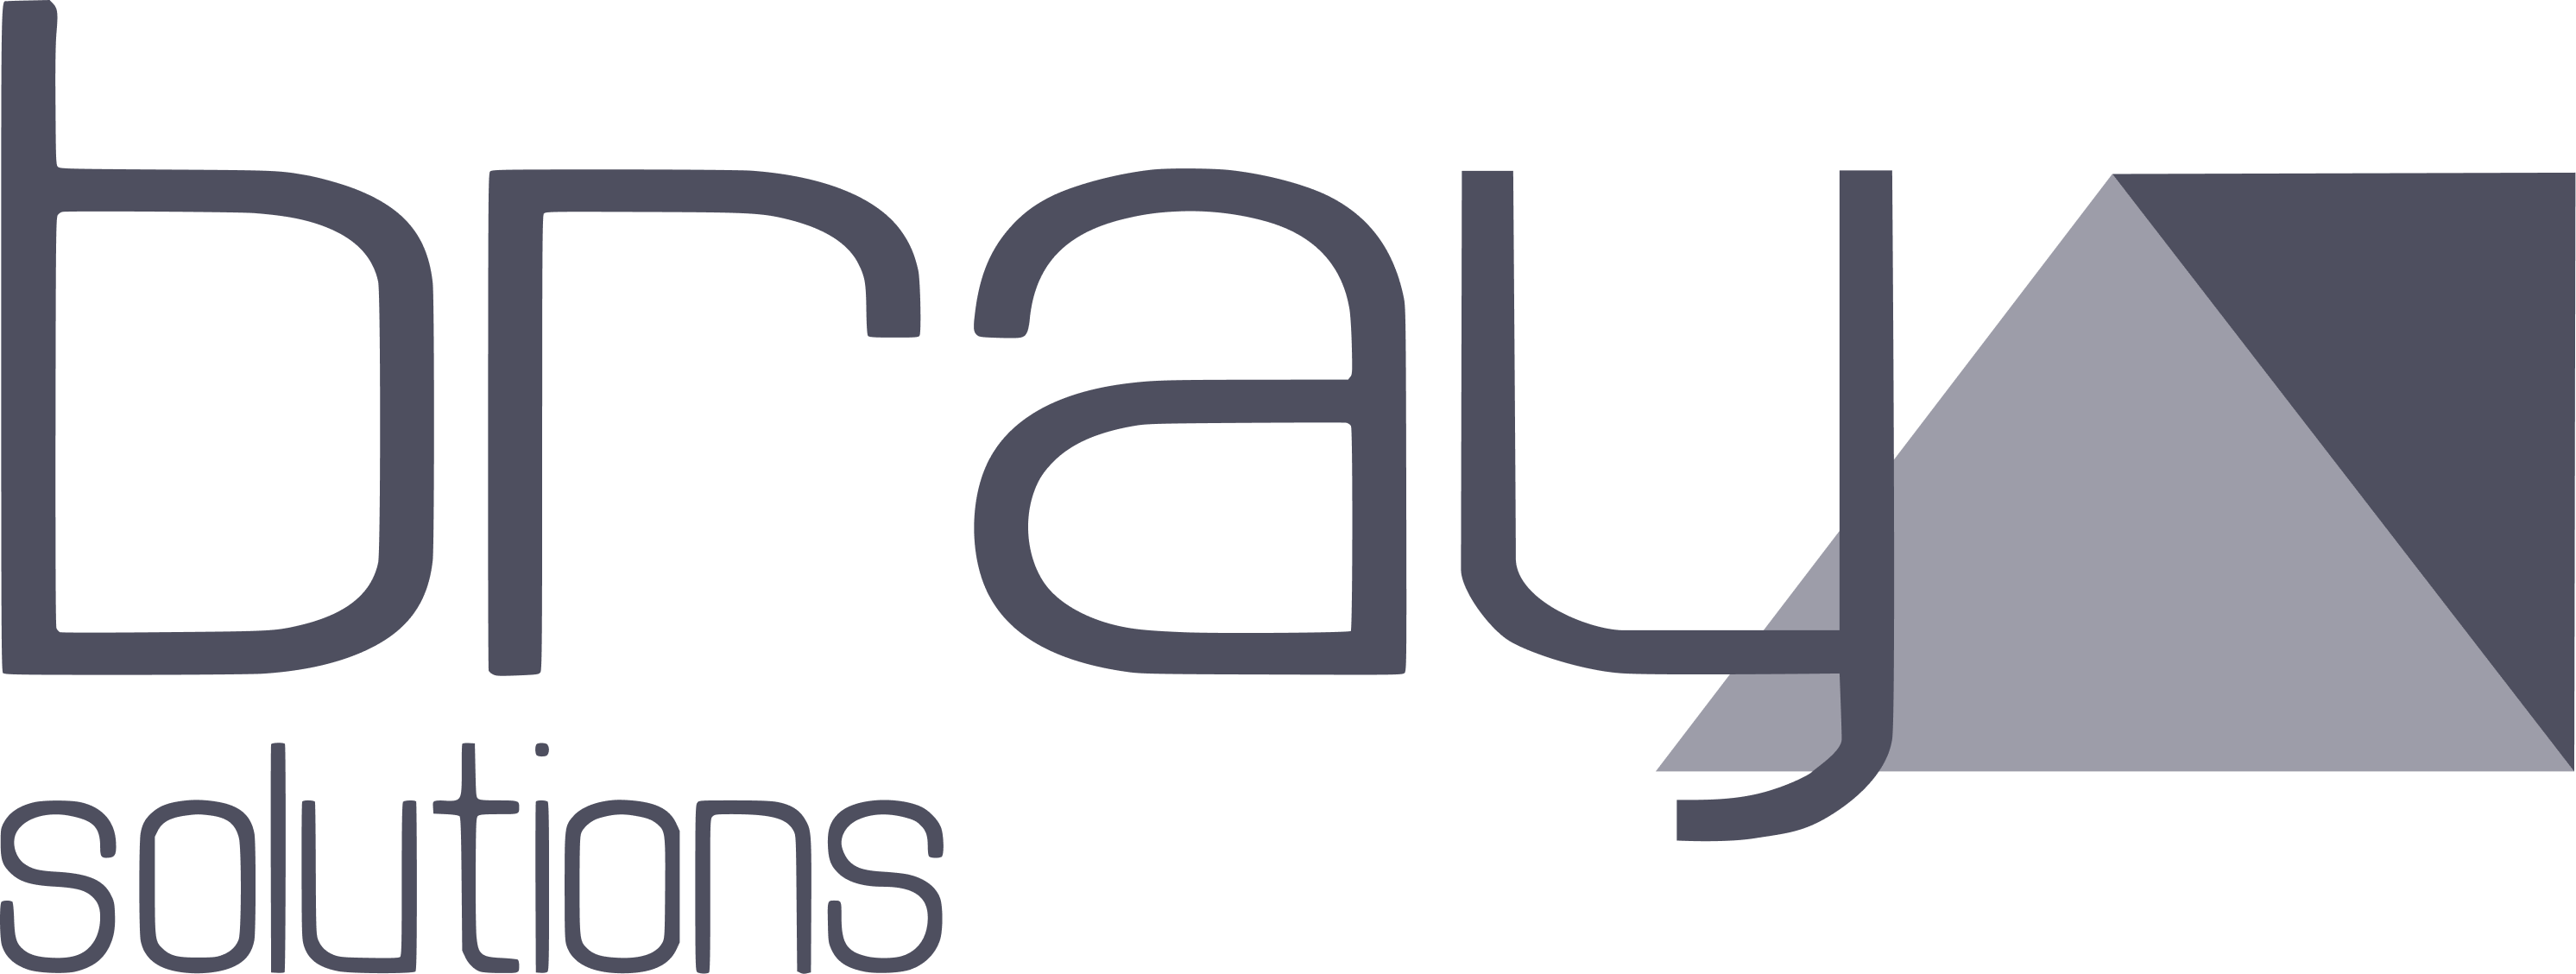 logo-bray-solutions-grey.png